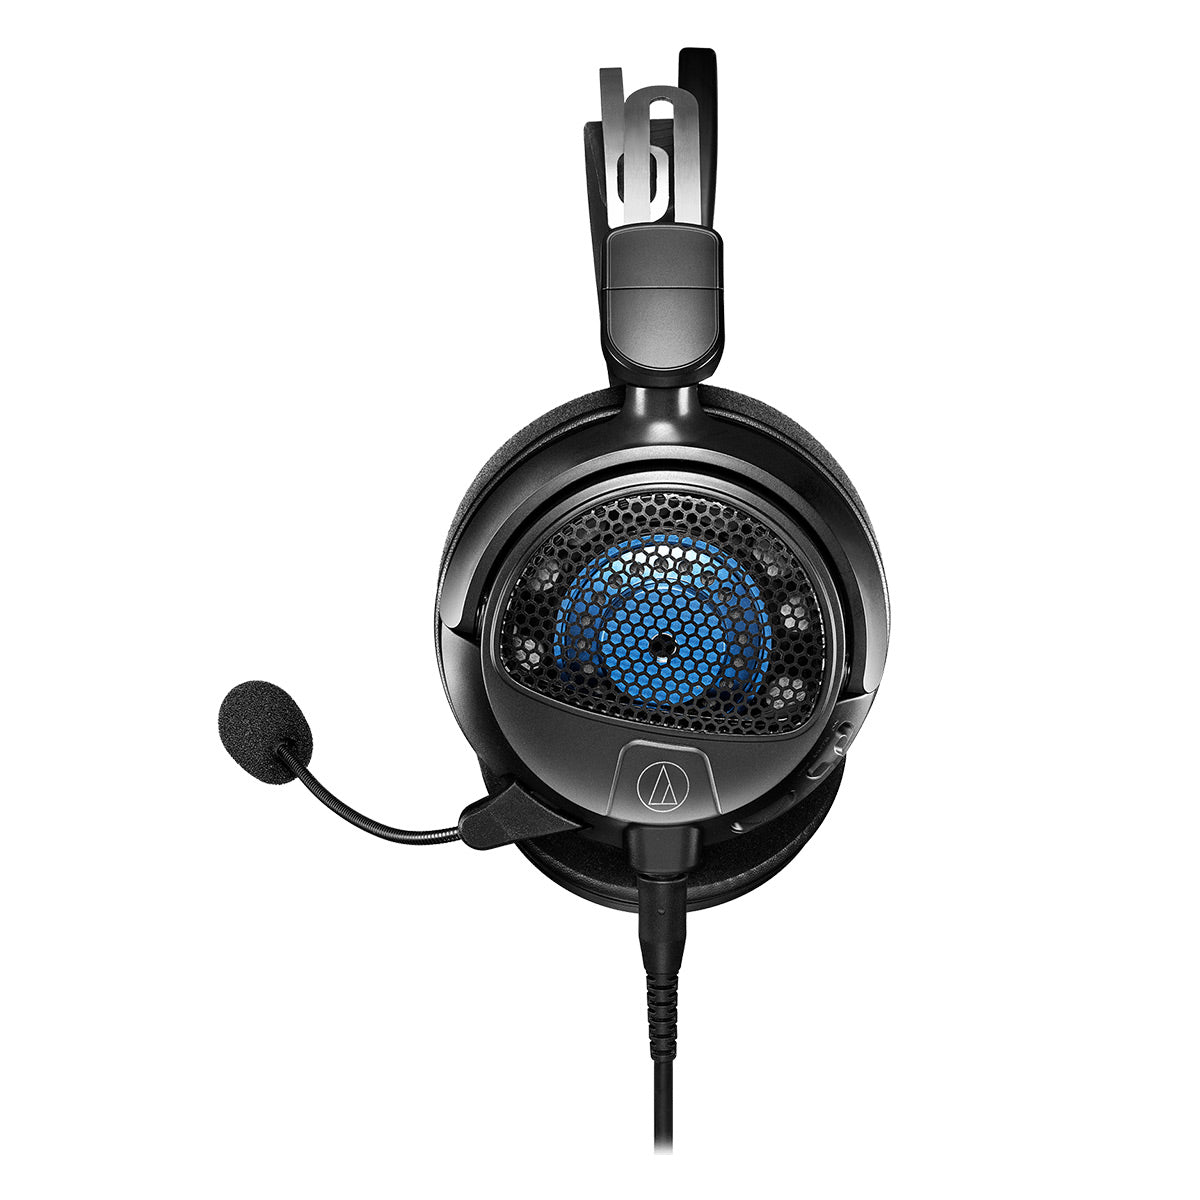 Audio-Technica ATH-GDL3 High-Fidelity Open-Back Gaming Headset (Black)